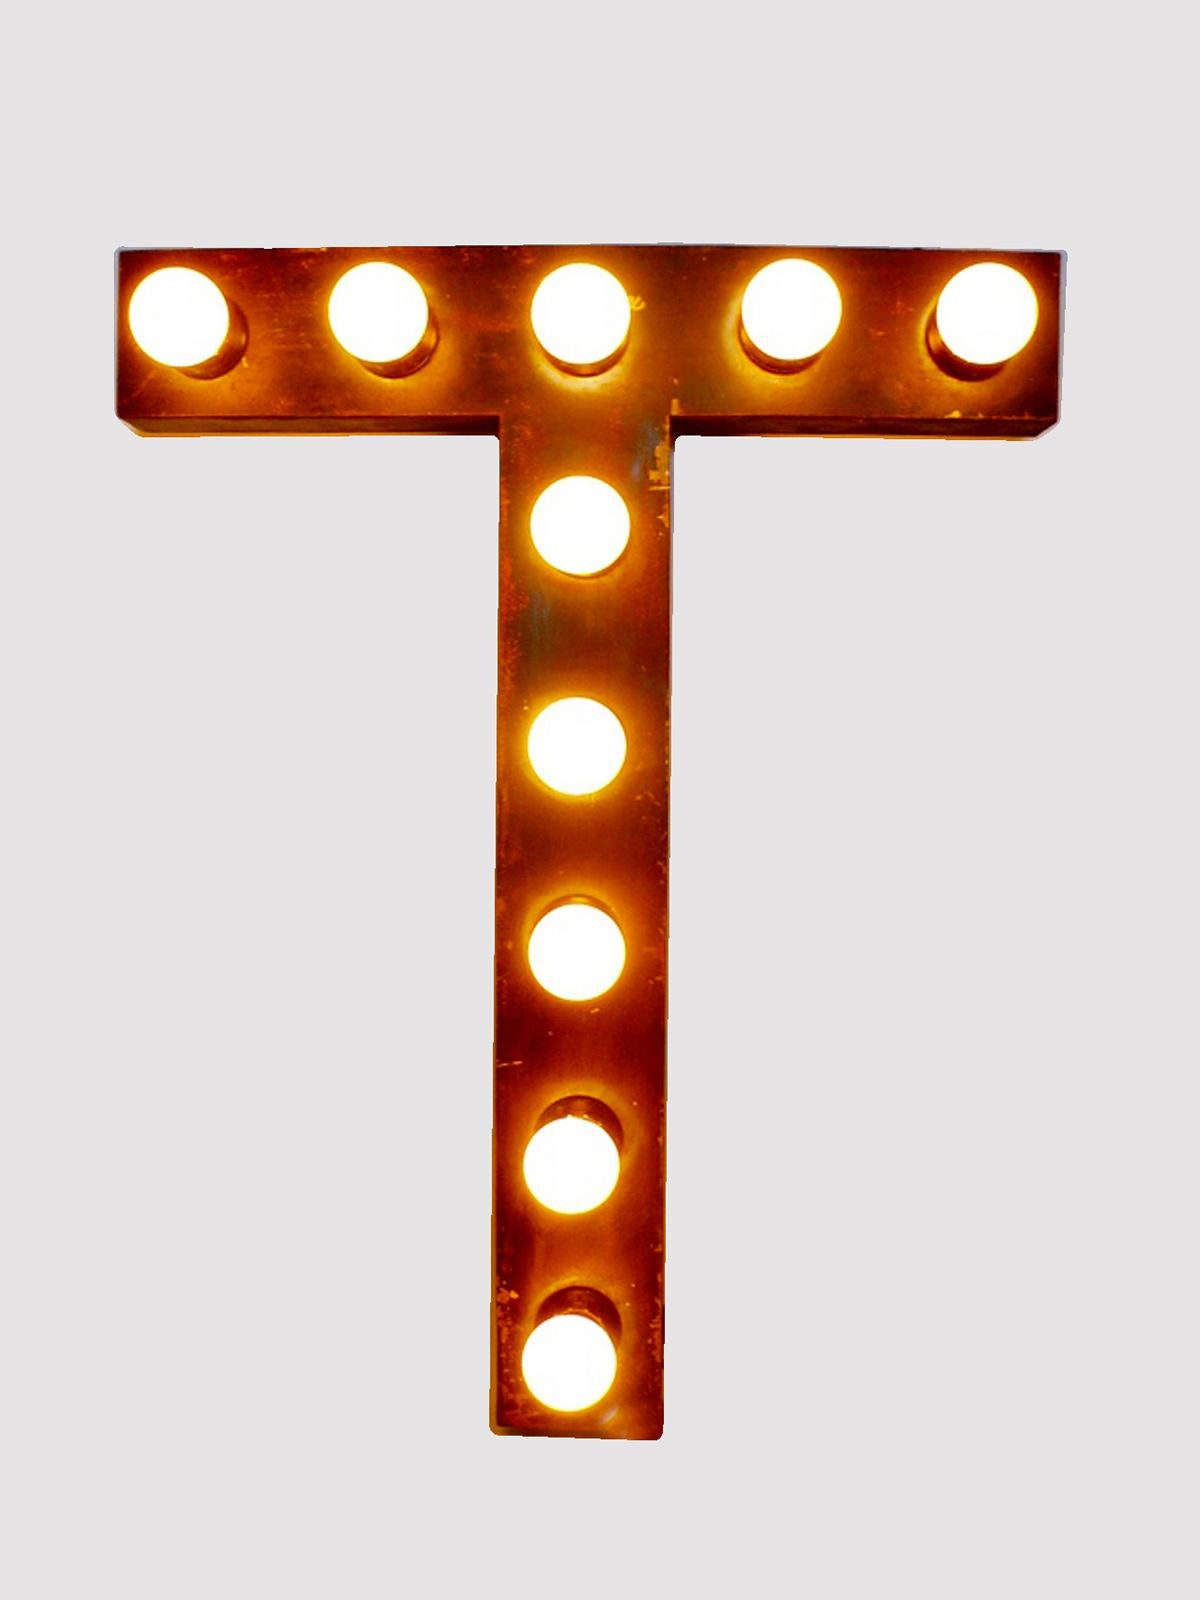 Painted Tin Letters Rewired with Bulbs Used for a Theater Sign, USA, 1930 For Sale 4